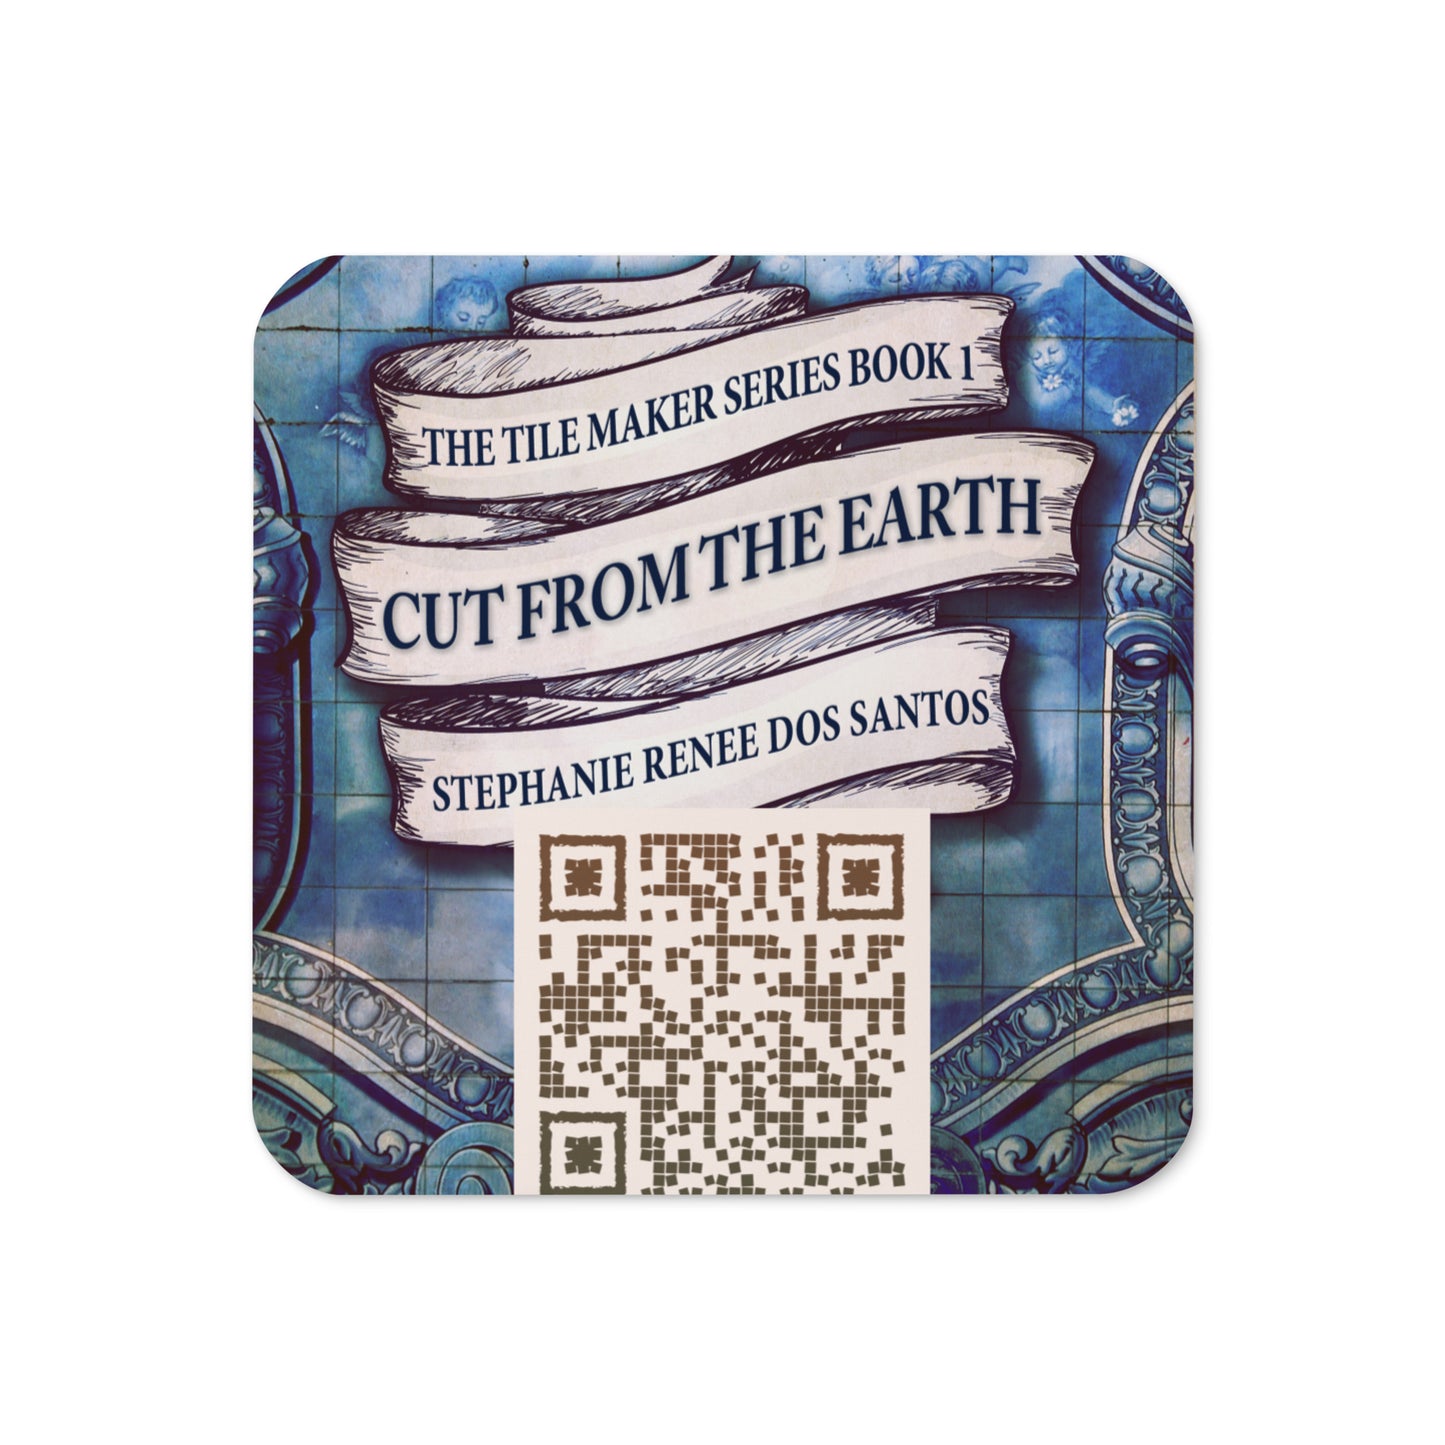 coaster with cover of Stephanie Renee Dos Santos’s book Cut From The Earth